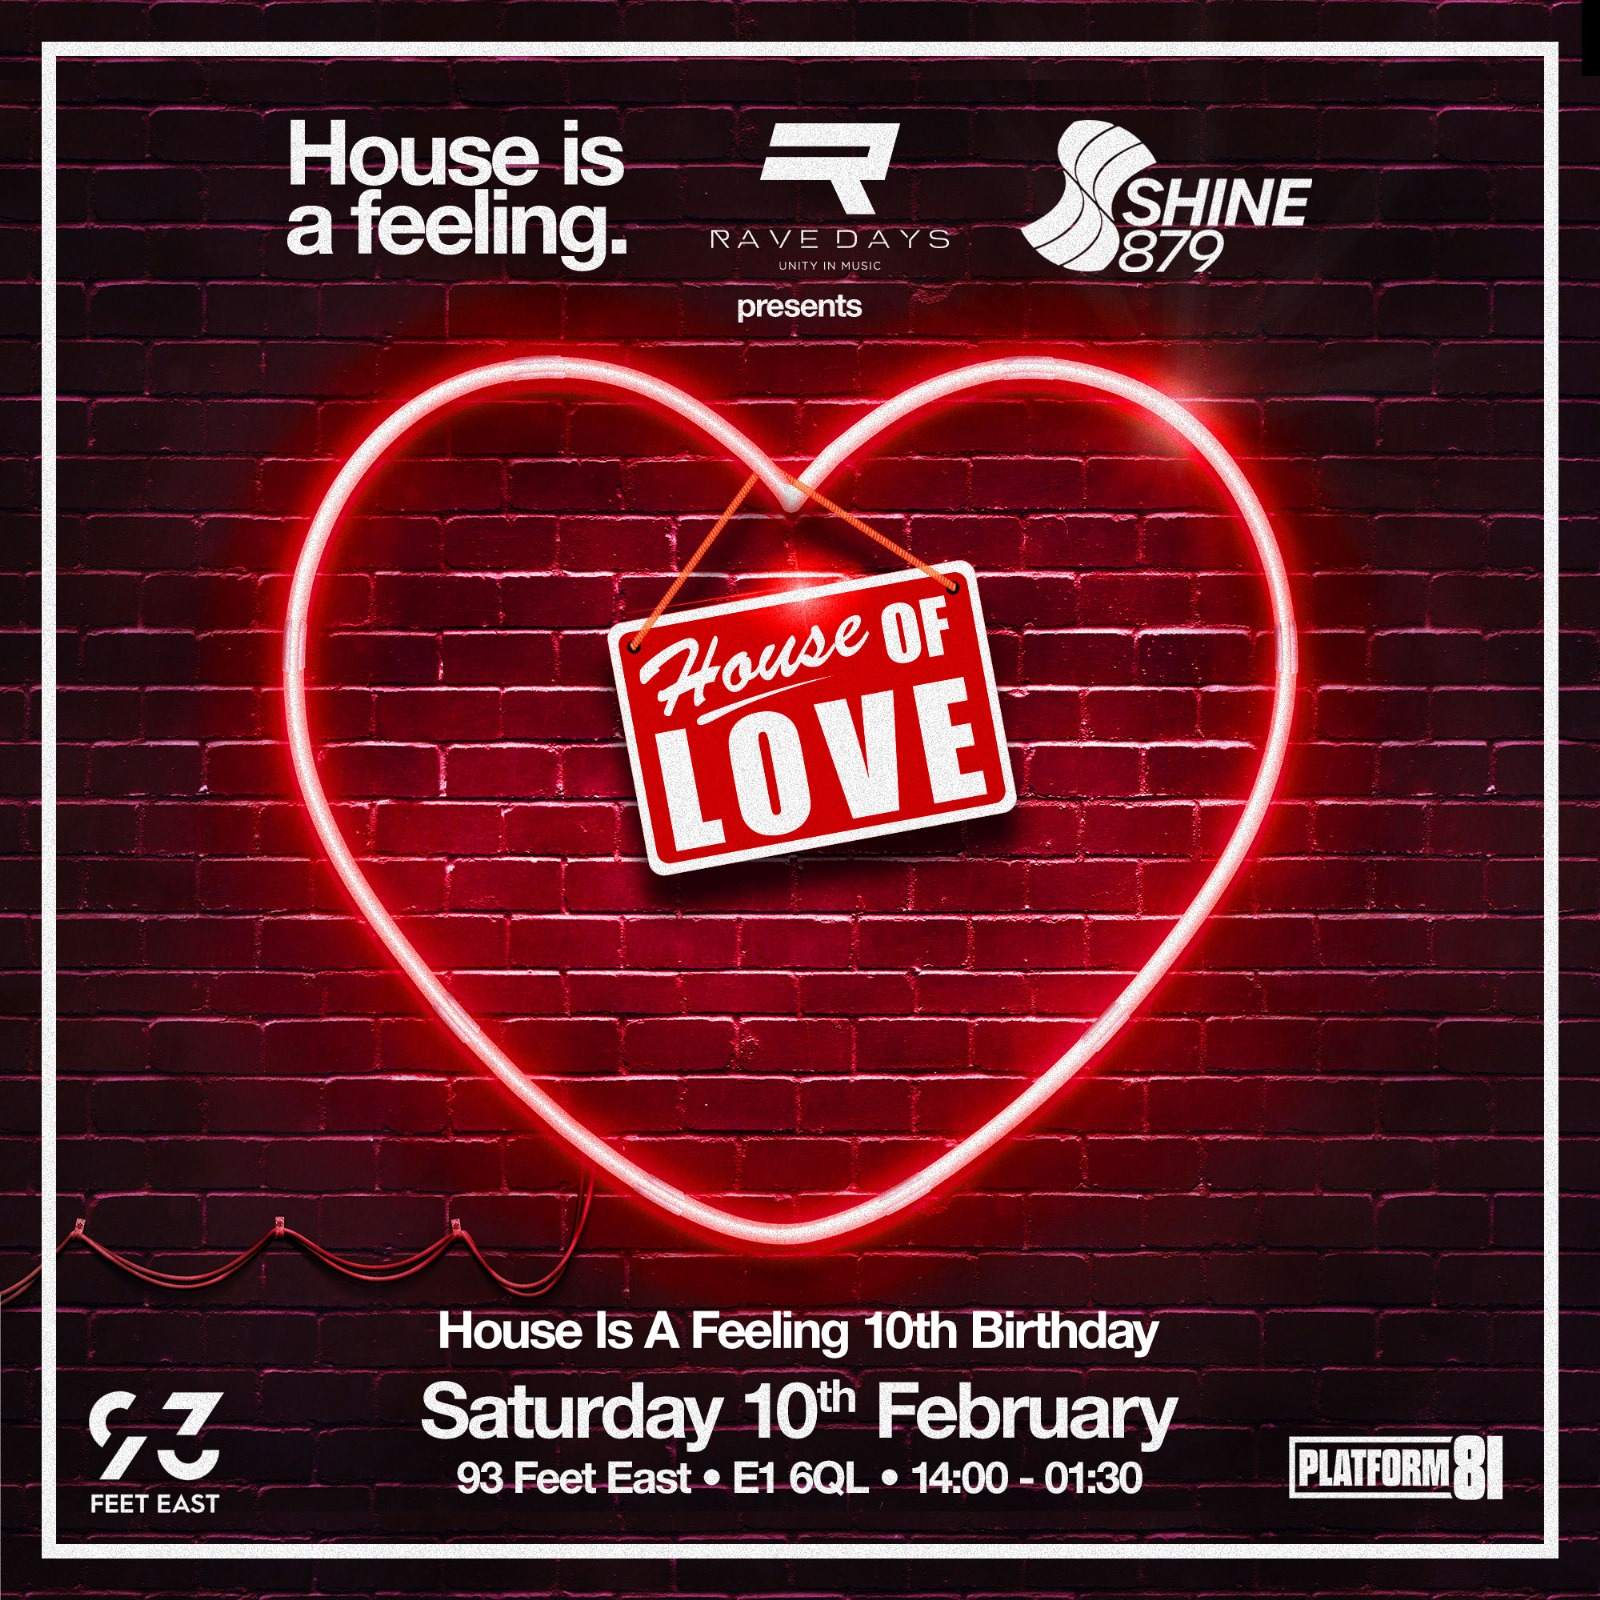 House is a feeling,Rave days & Shine 879 DAB present The House Of Love (NO ID NO ENTRY)  - フライヤー表